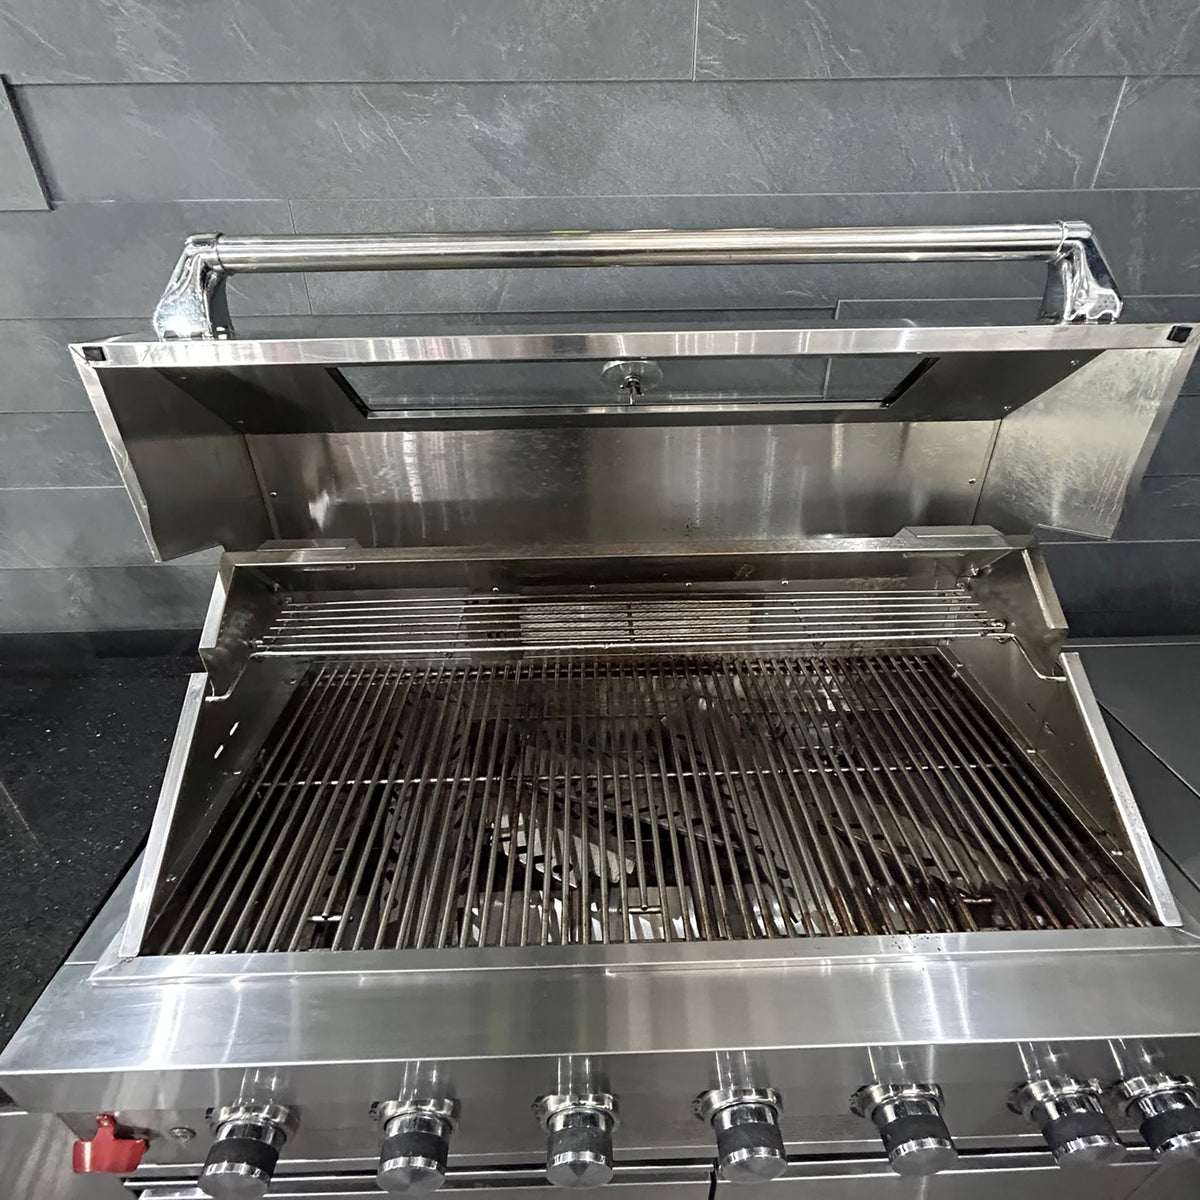 Ex Display Draco Grills 6 Burner Stainless Steel Outdoor Kitchen with Sear Station, Sink Unit, 90 Degree Corner and Double Fridge Unit